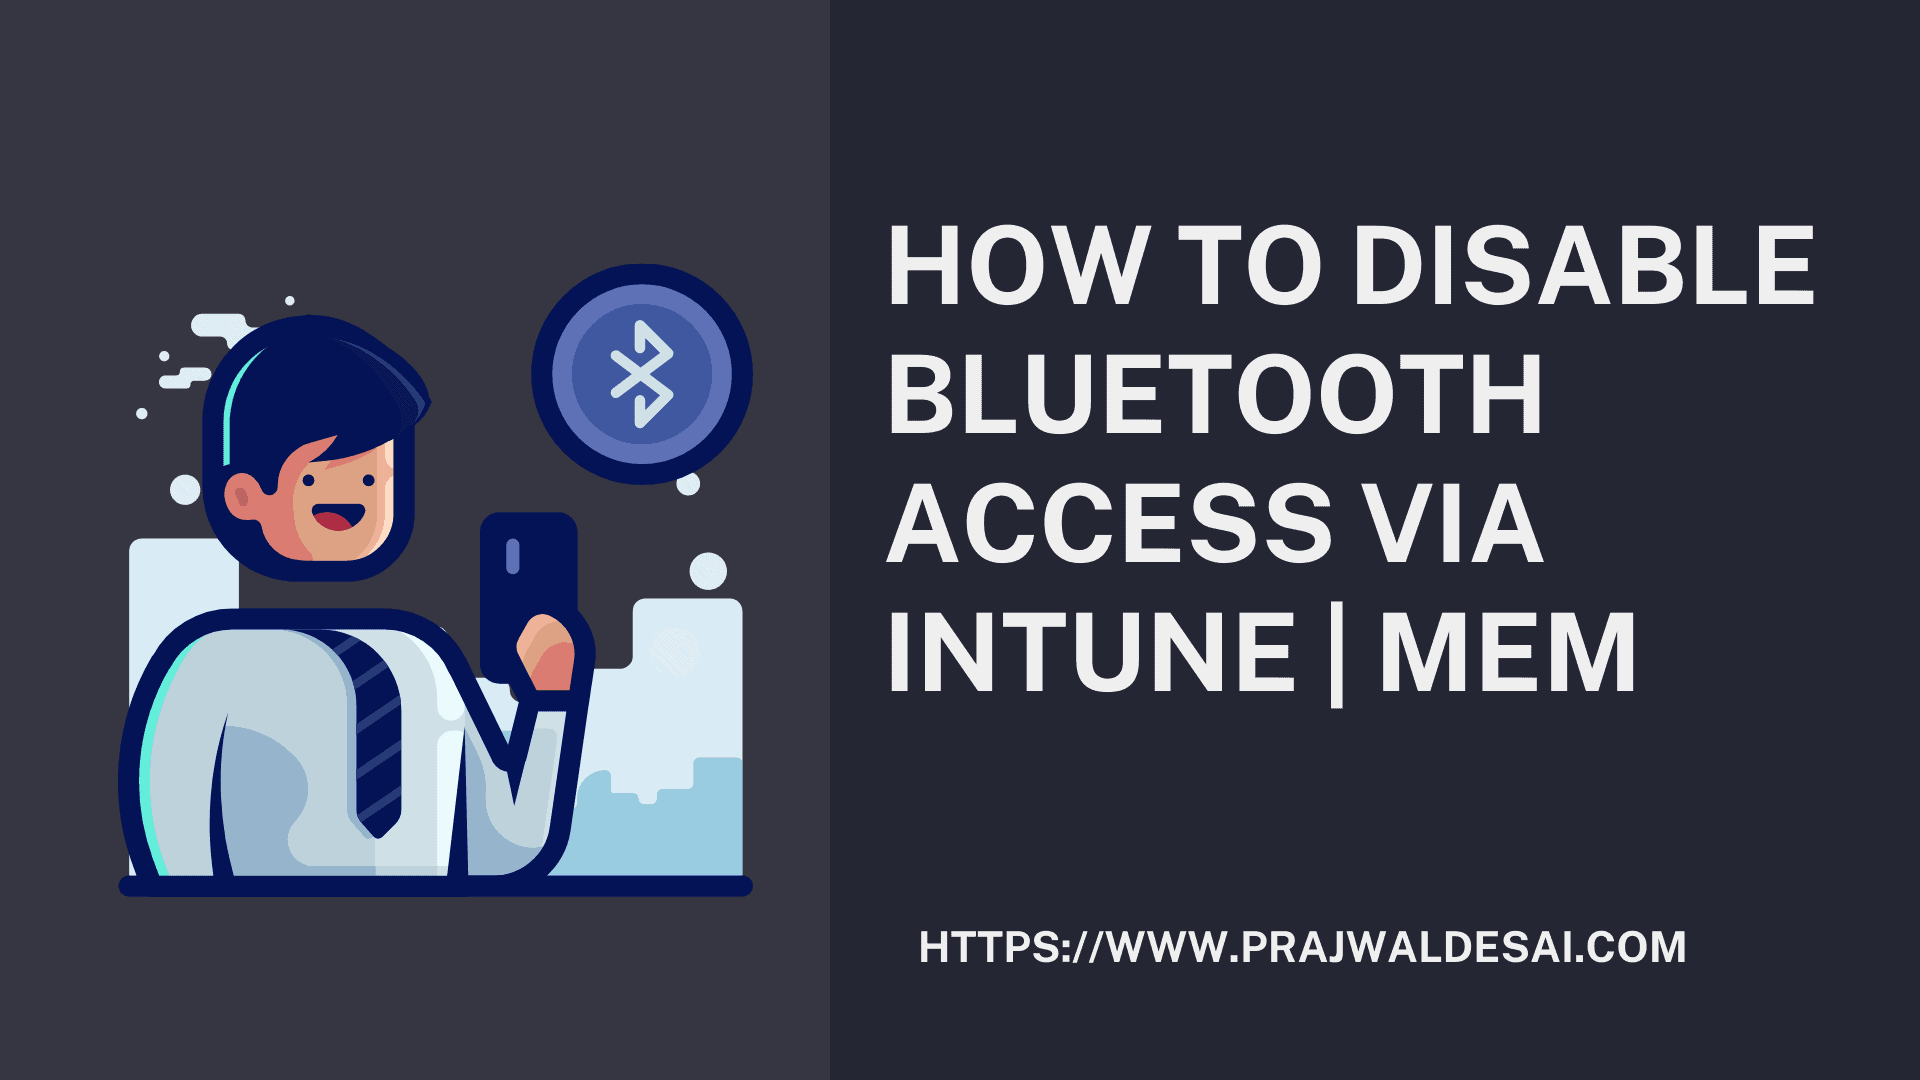 How to Disable Bluetooth using Intune